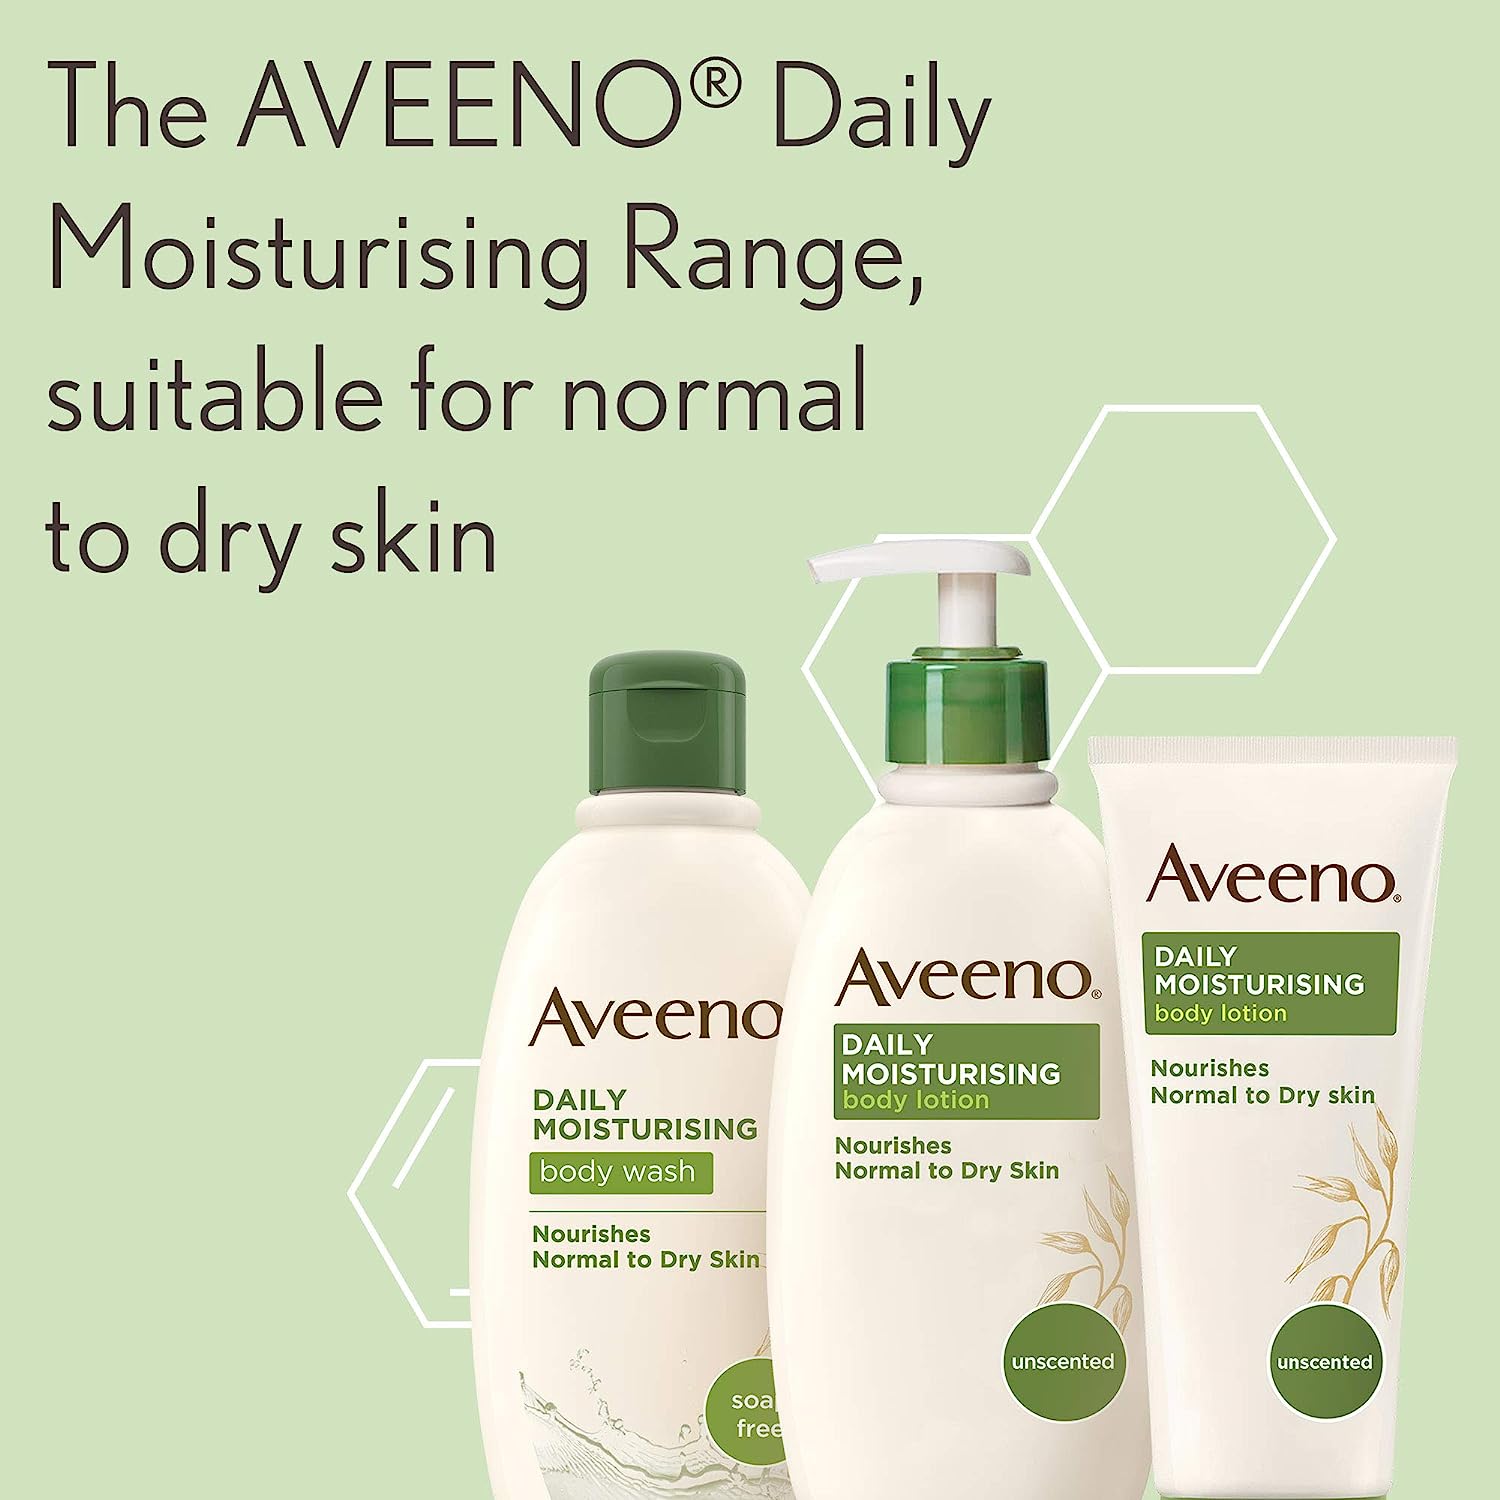 Aveeno Daily Moisturising Body Lotion, Normal to Dry Skin, 200ml - Healthxpress.ie